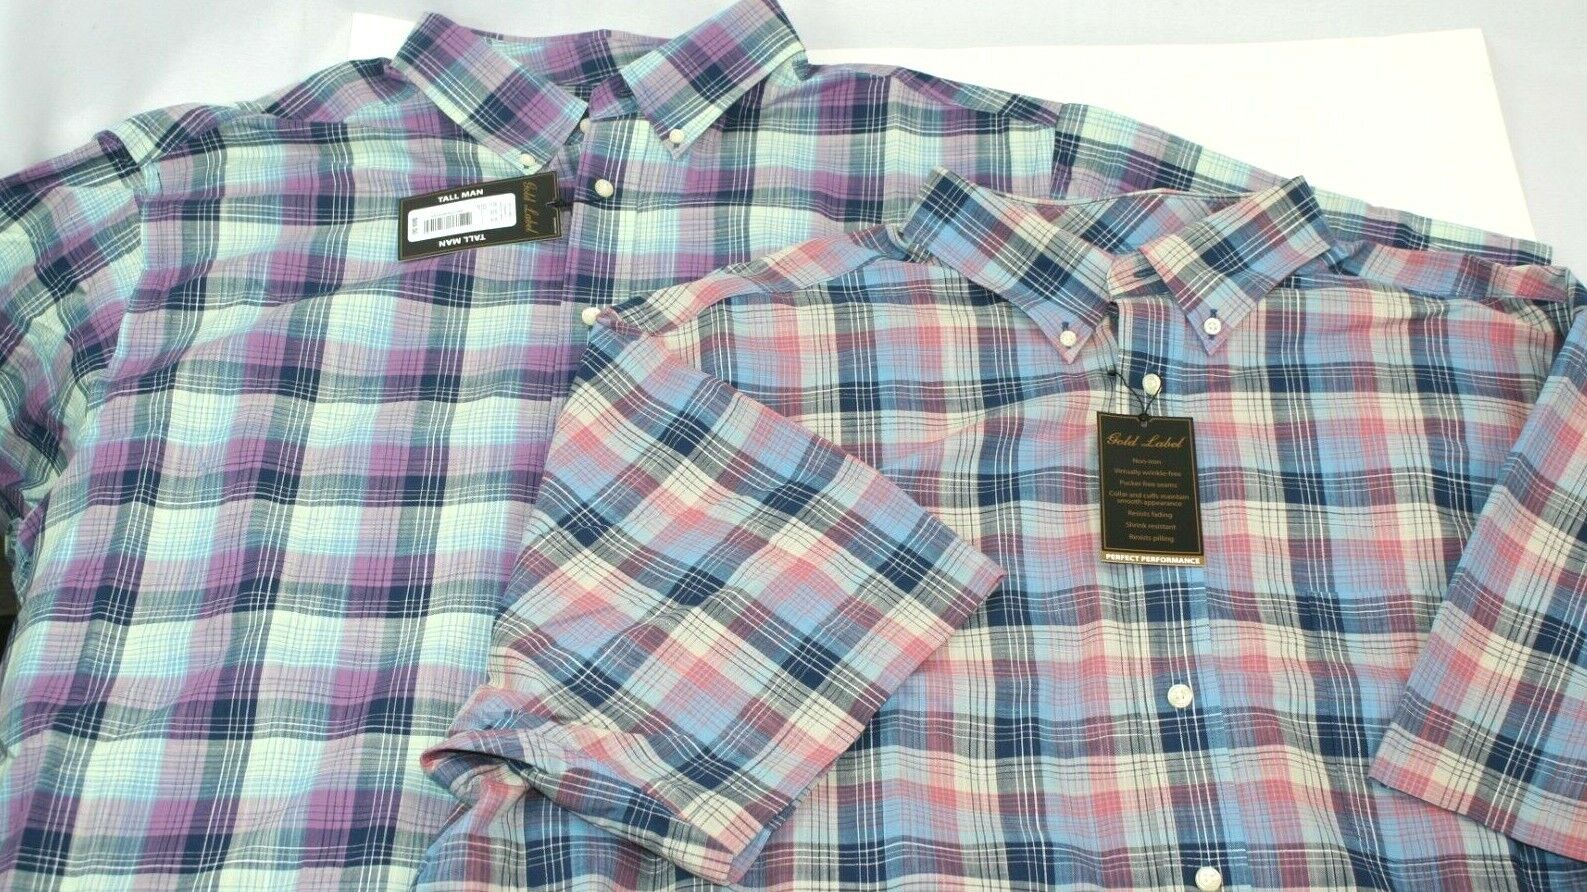 Lot of 2 Gold Label Mens Short Sleeve Plaid Button Front Shirt Size 2XLT NWT Roundtree & Yorke